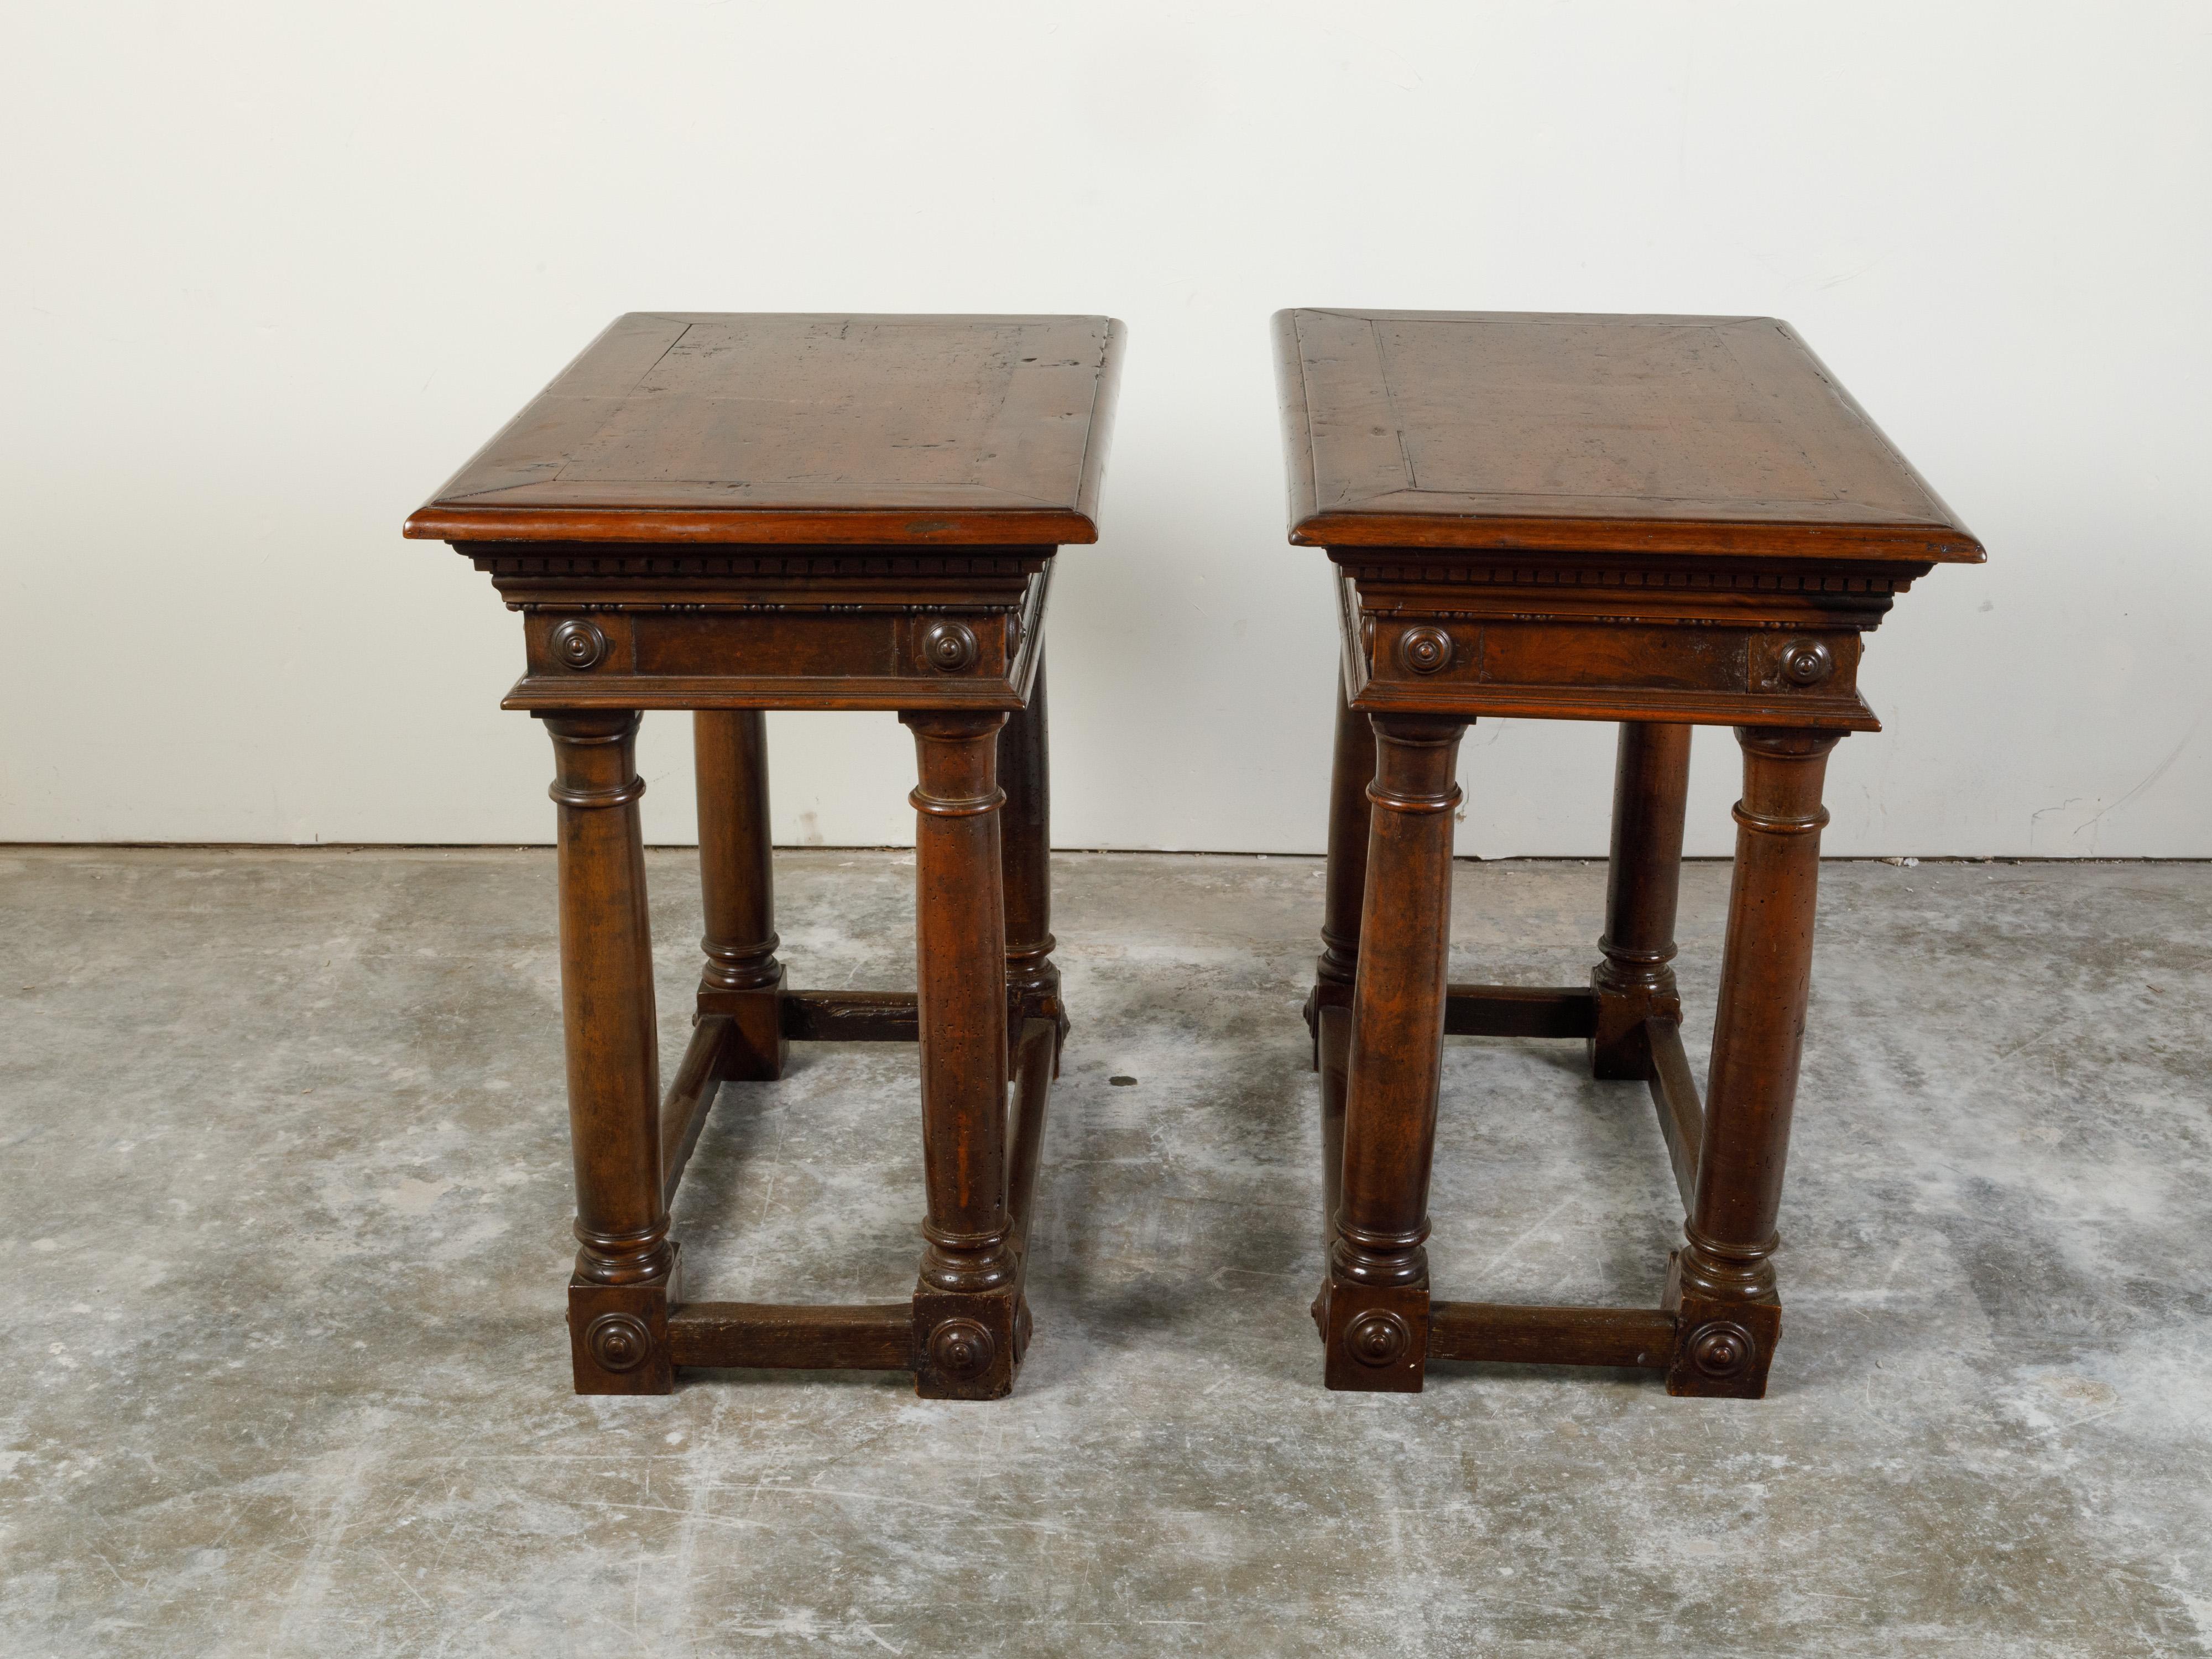 Pair of Italian 19th Century Carved Walnut Console Tables with Doric Columns For Sale 3